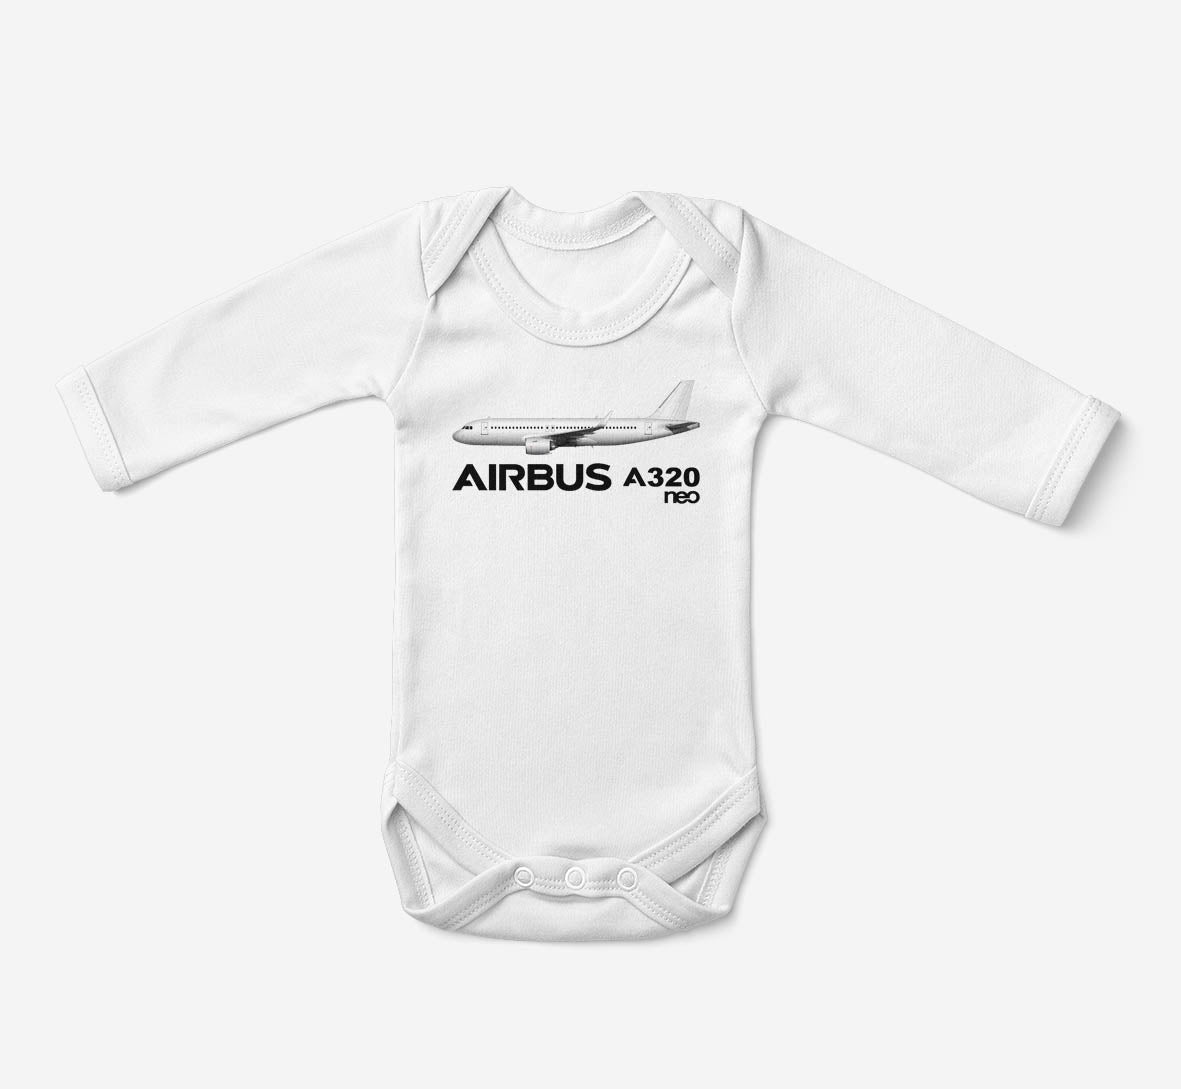 The Airbus A320Neo Designed Baby Bodysuits